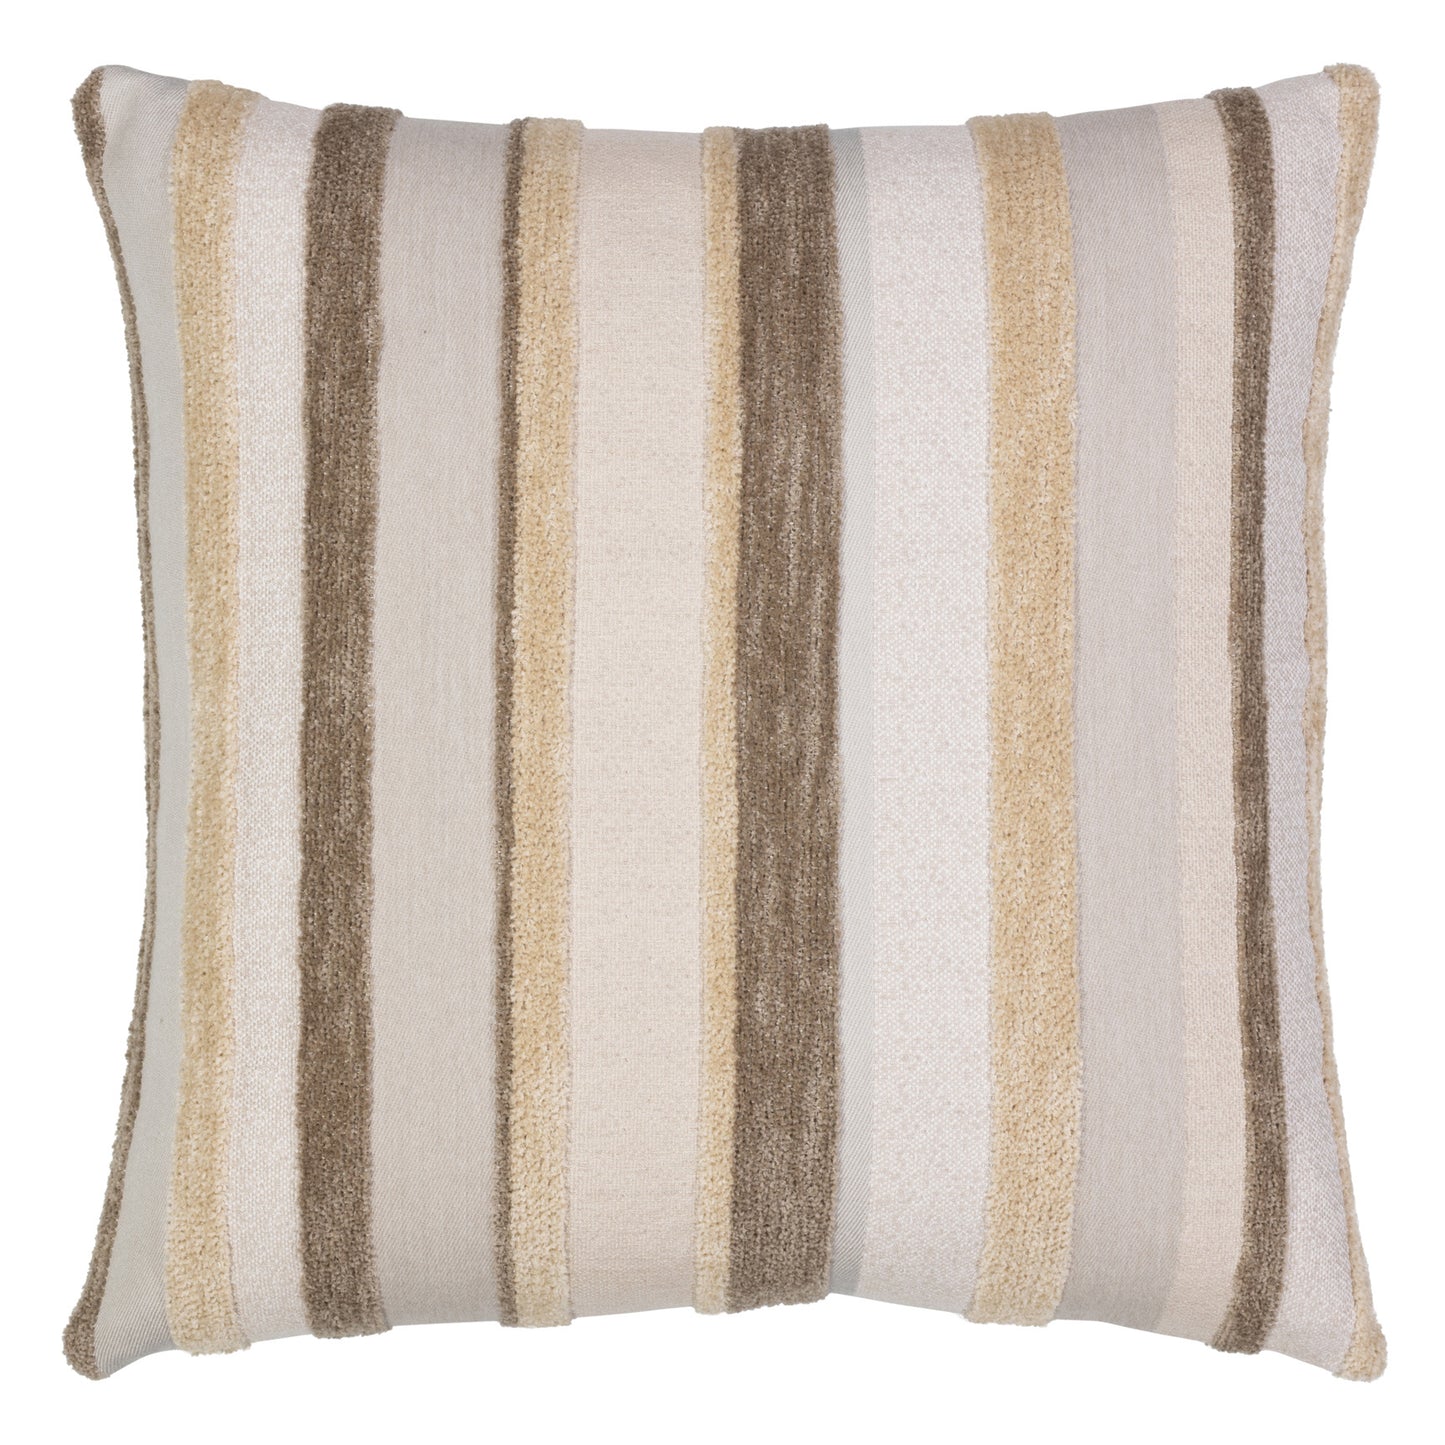 Elaine Smith 20 Square Pillow Luxe Channel Latte, image 1